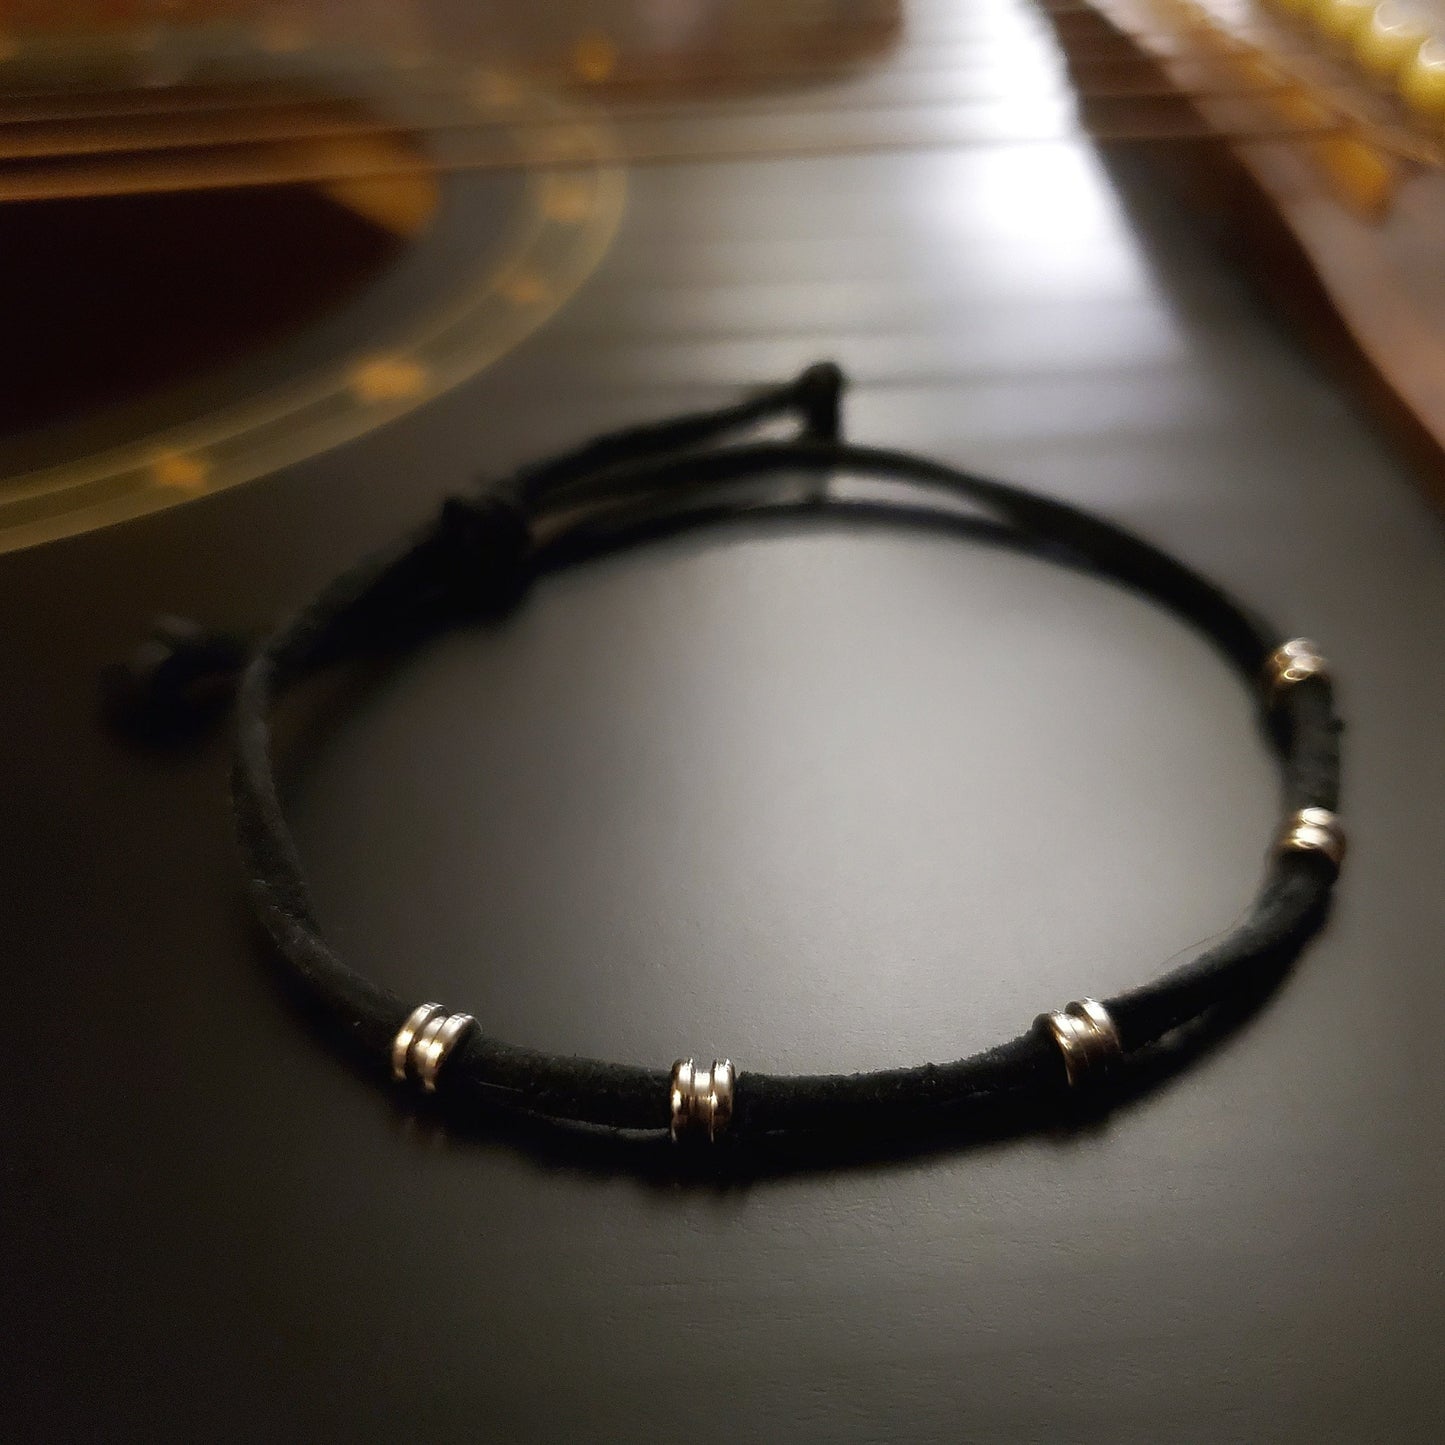 black bracelet made from a suede cord and silver coloured guitar string ballends sitting on the body of a black guitar